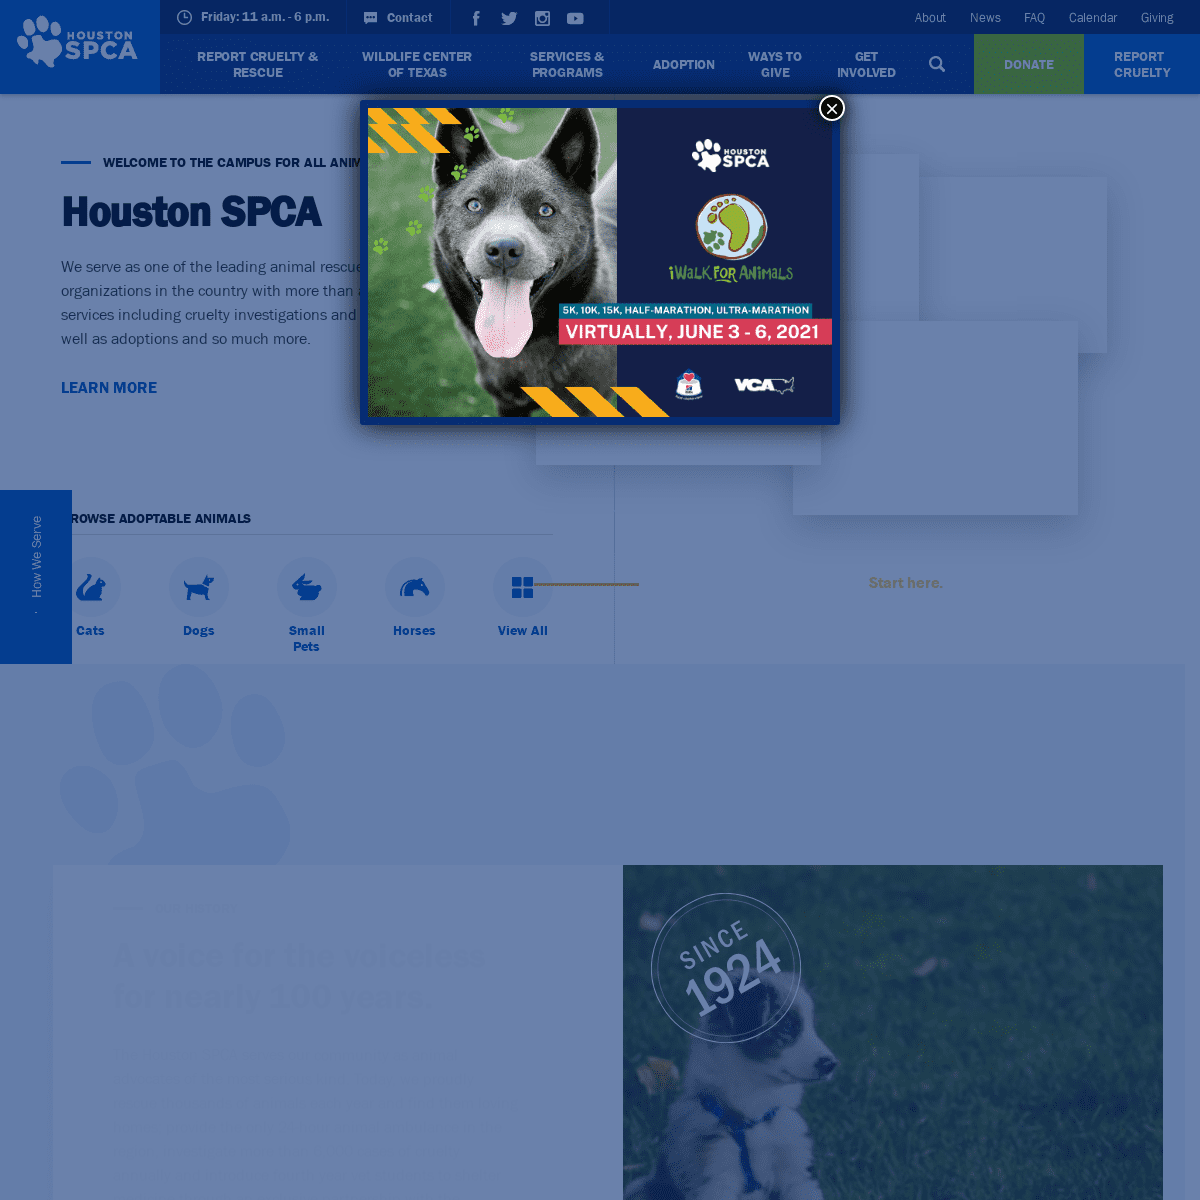 A complete backup of https://houstonspca.org